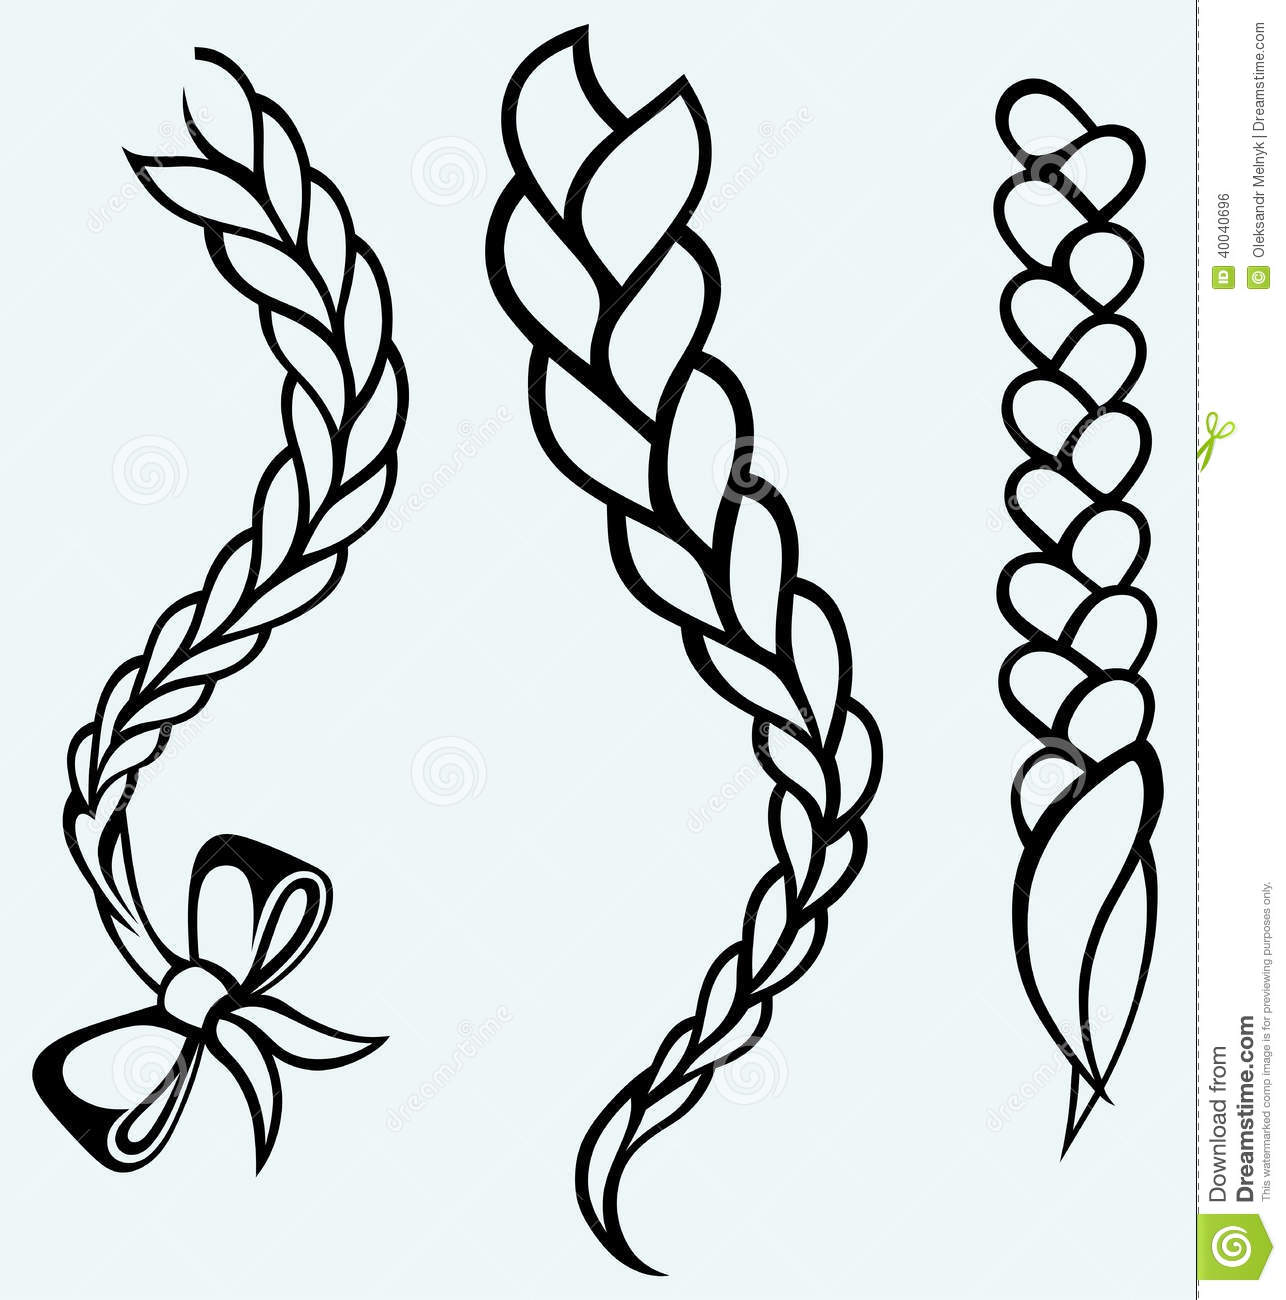 Braid clipart #15, Download drawings